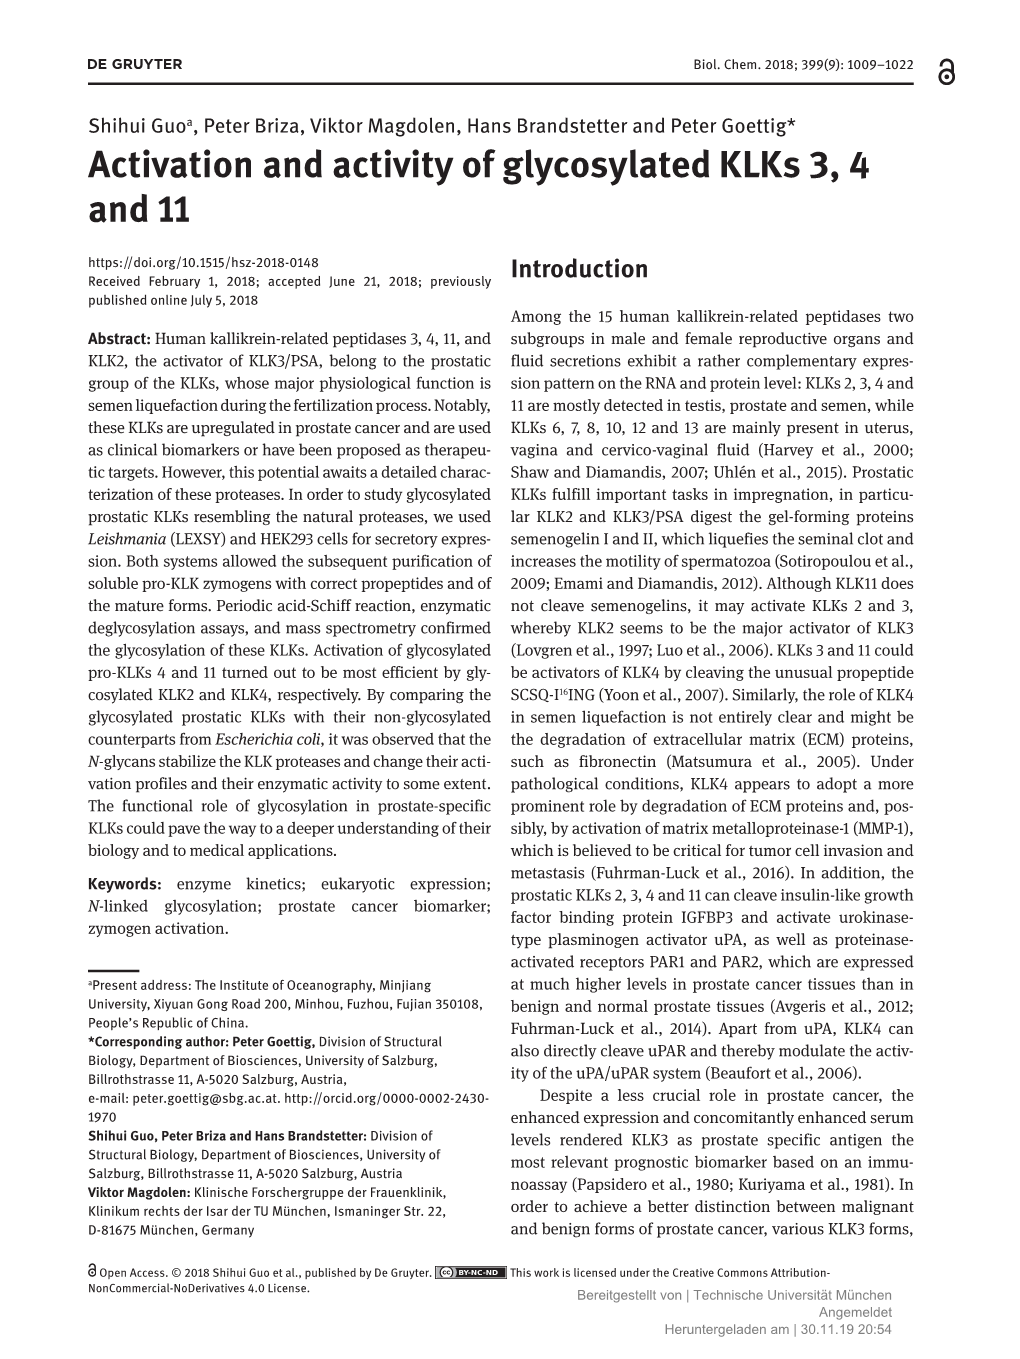 Activation and Activity of Glycosylated Klks 3, 4 and 11